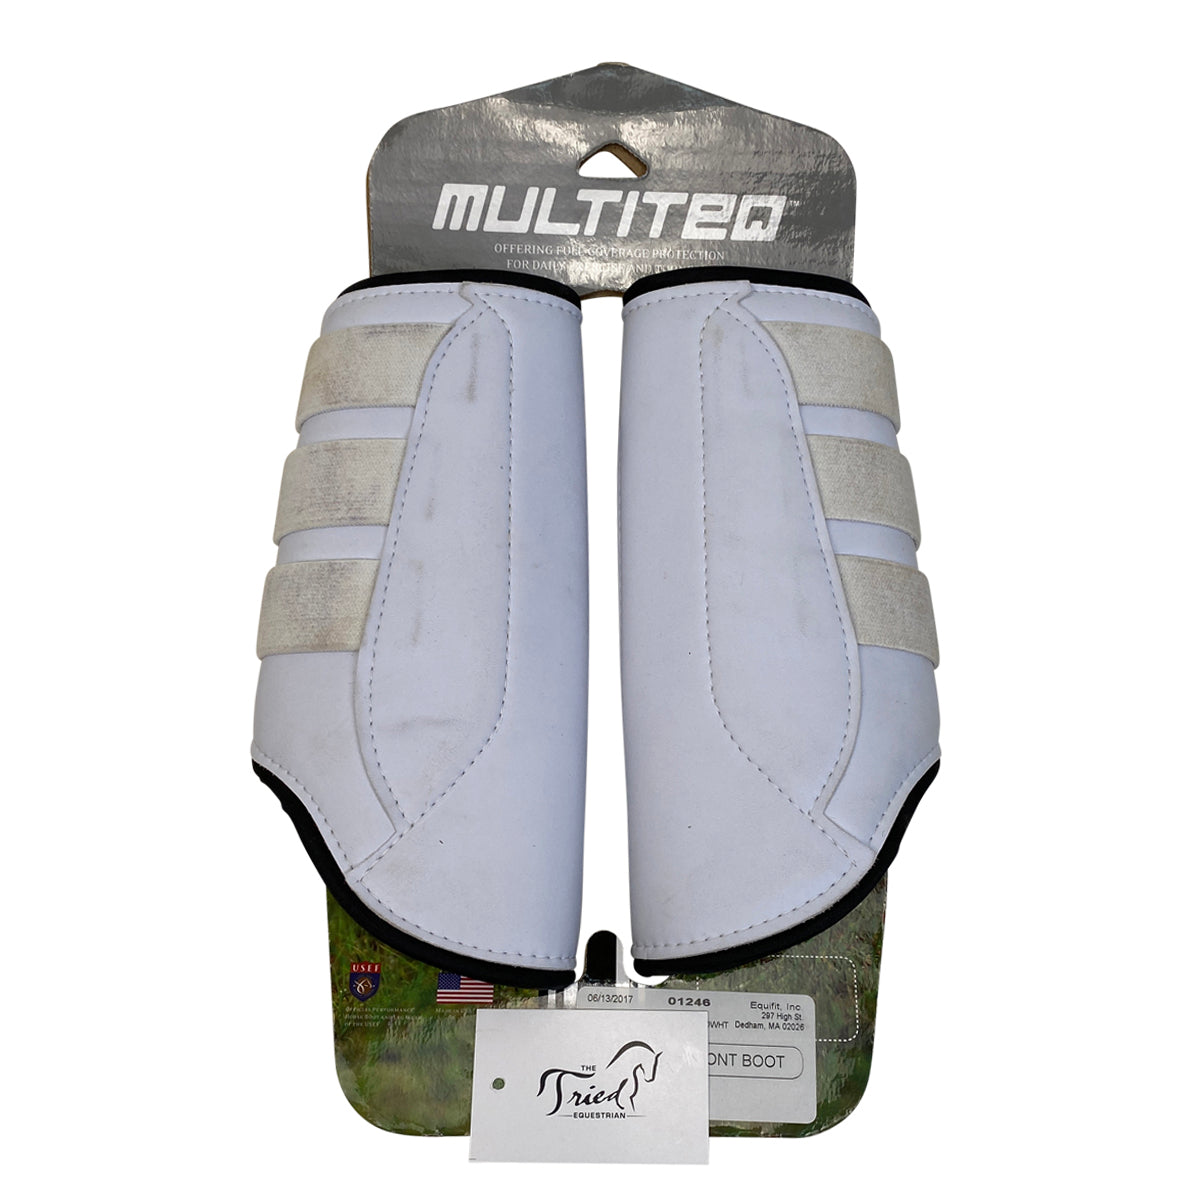 EquiFit 'MultiTeq' Front Boots in White